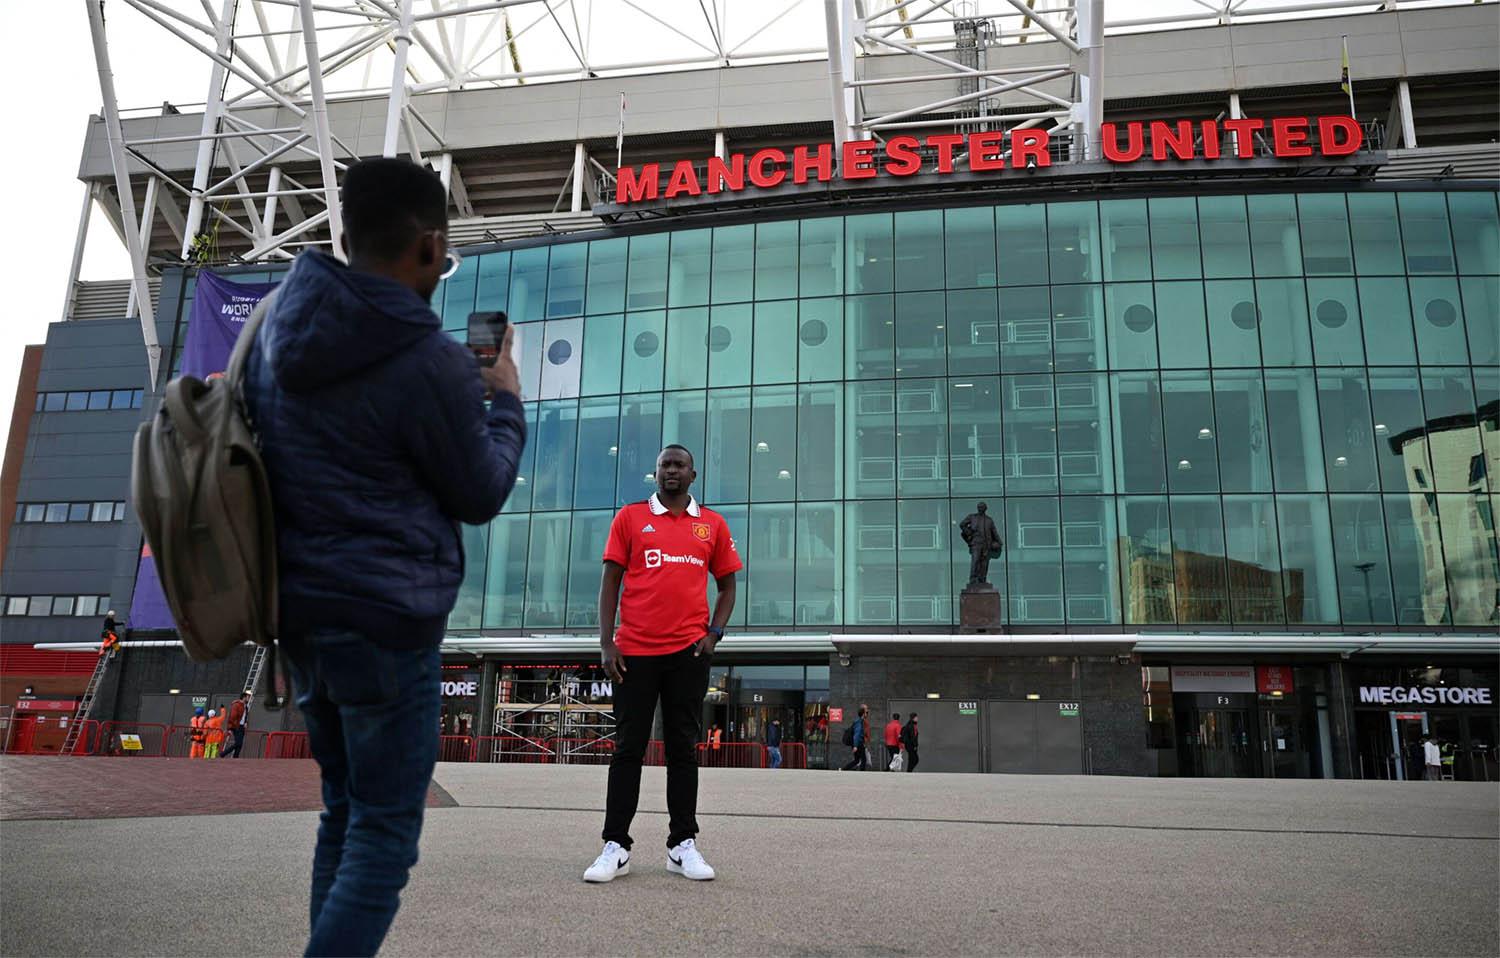 Manchester United declined to comment on Sheikh Jassim's offer